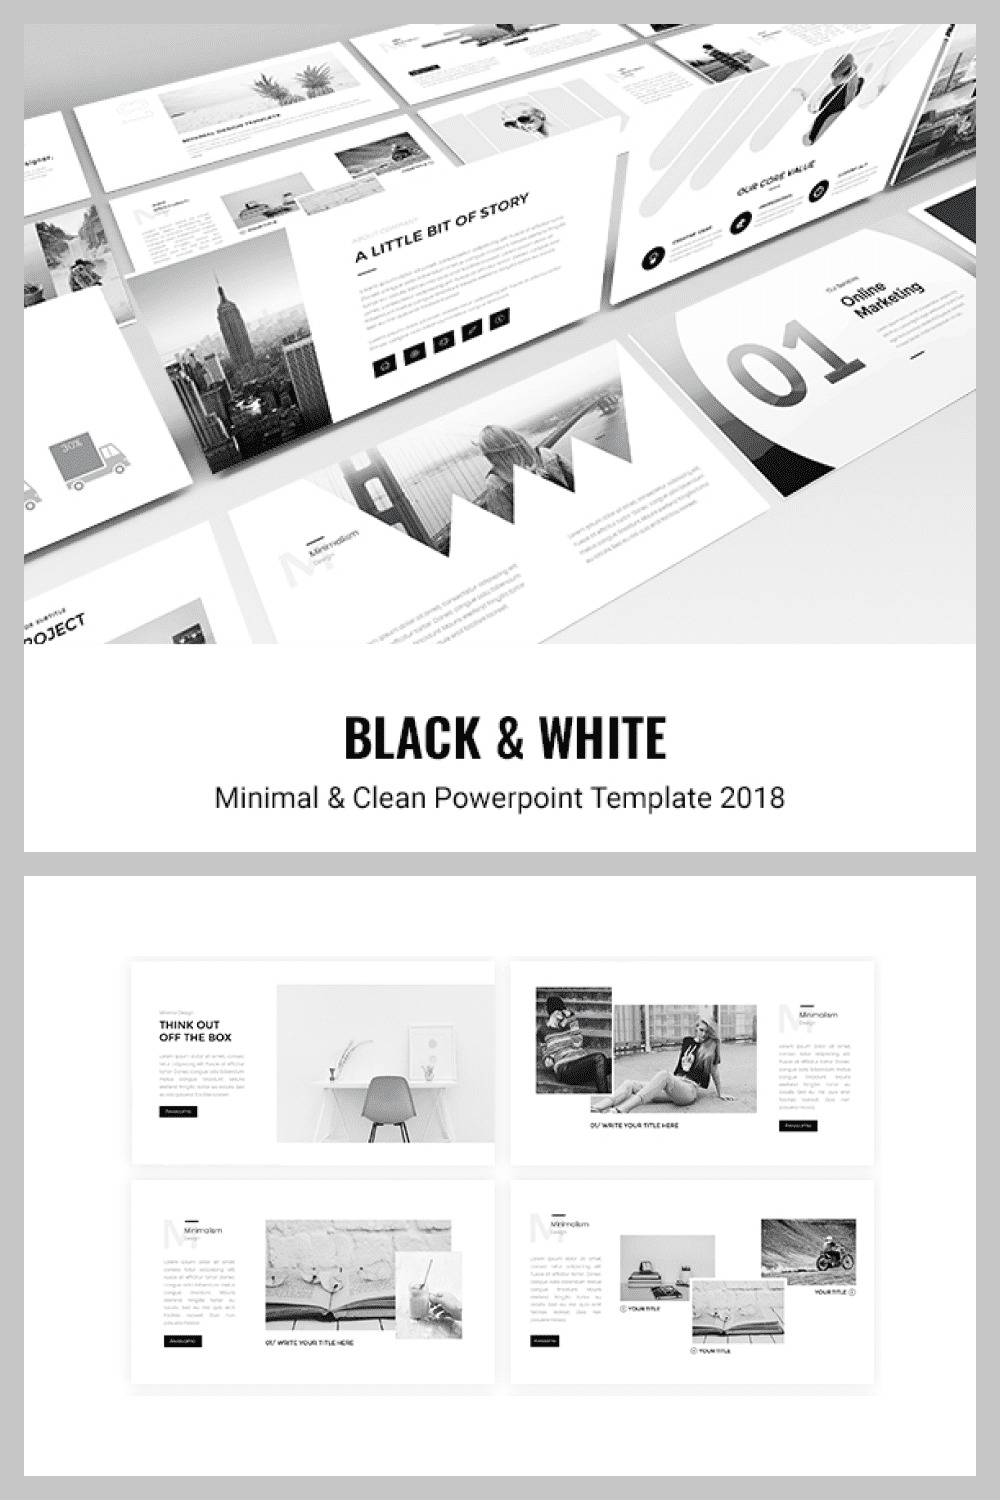 2 in 1 Black & White powerpoint template.